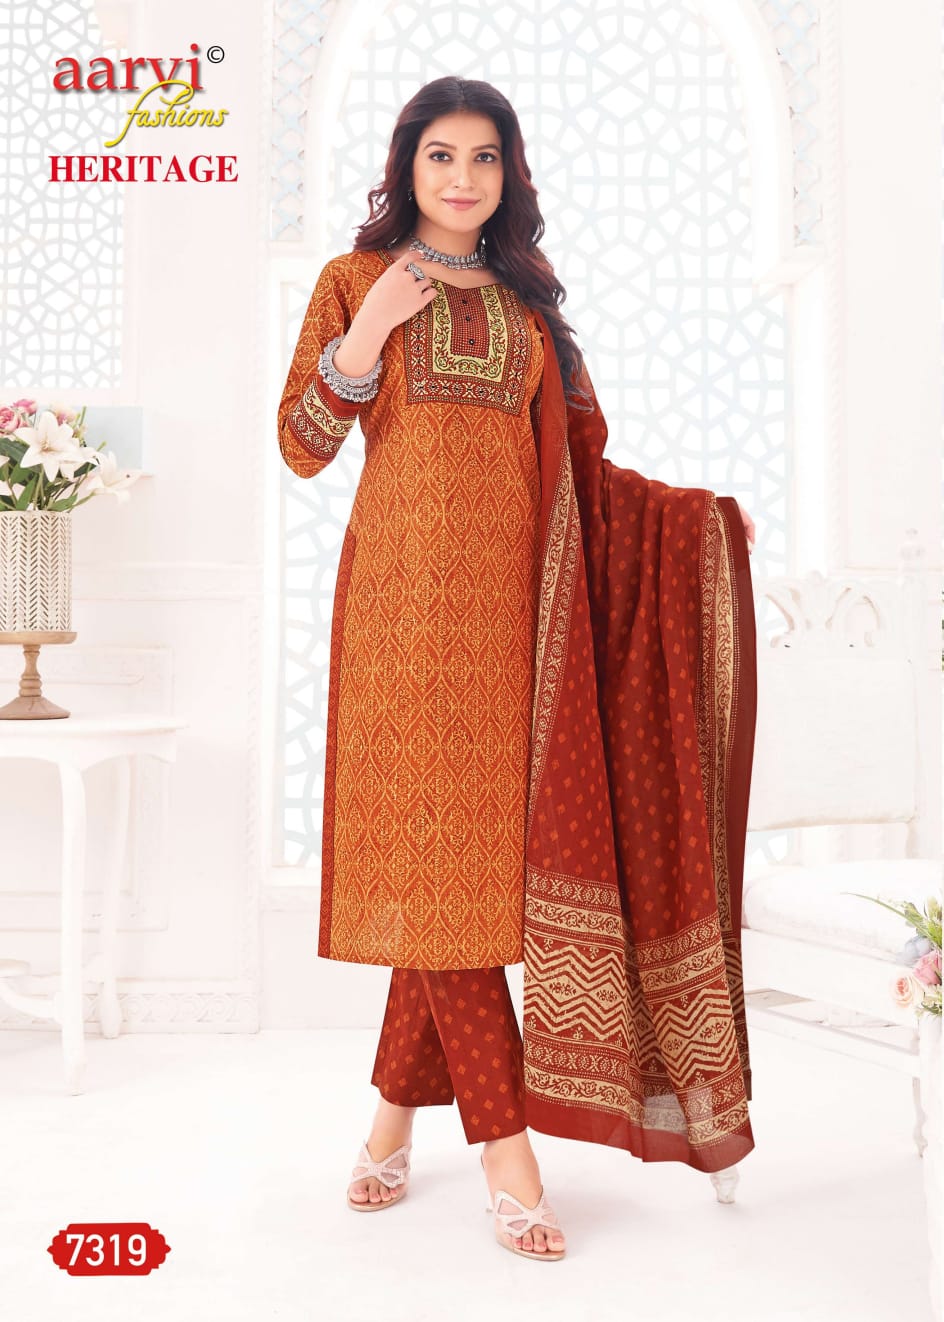 Heritage Vol 1 Aarvi Fashions Cotton Pant Style Suits